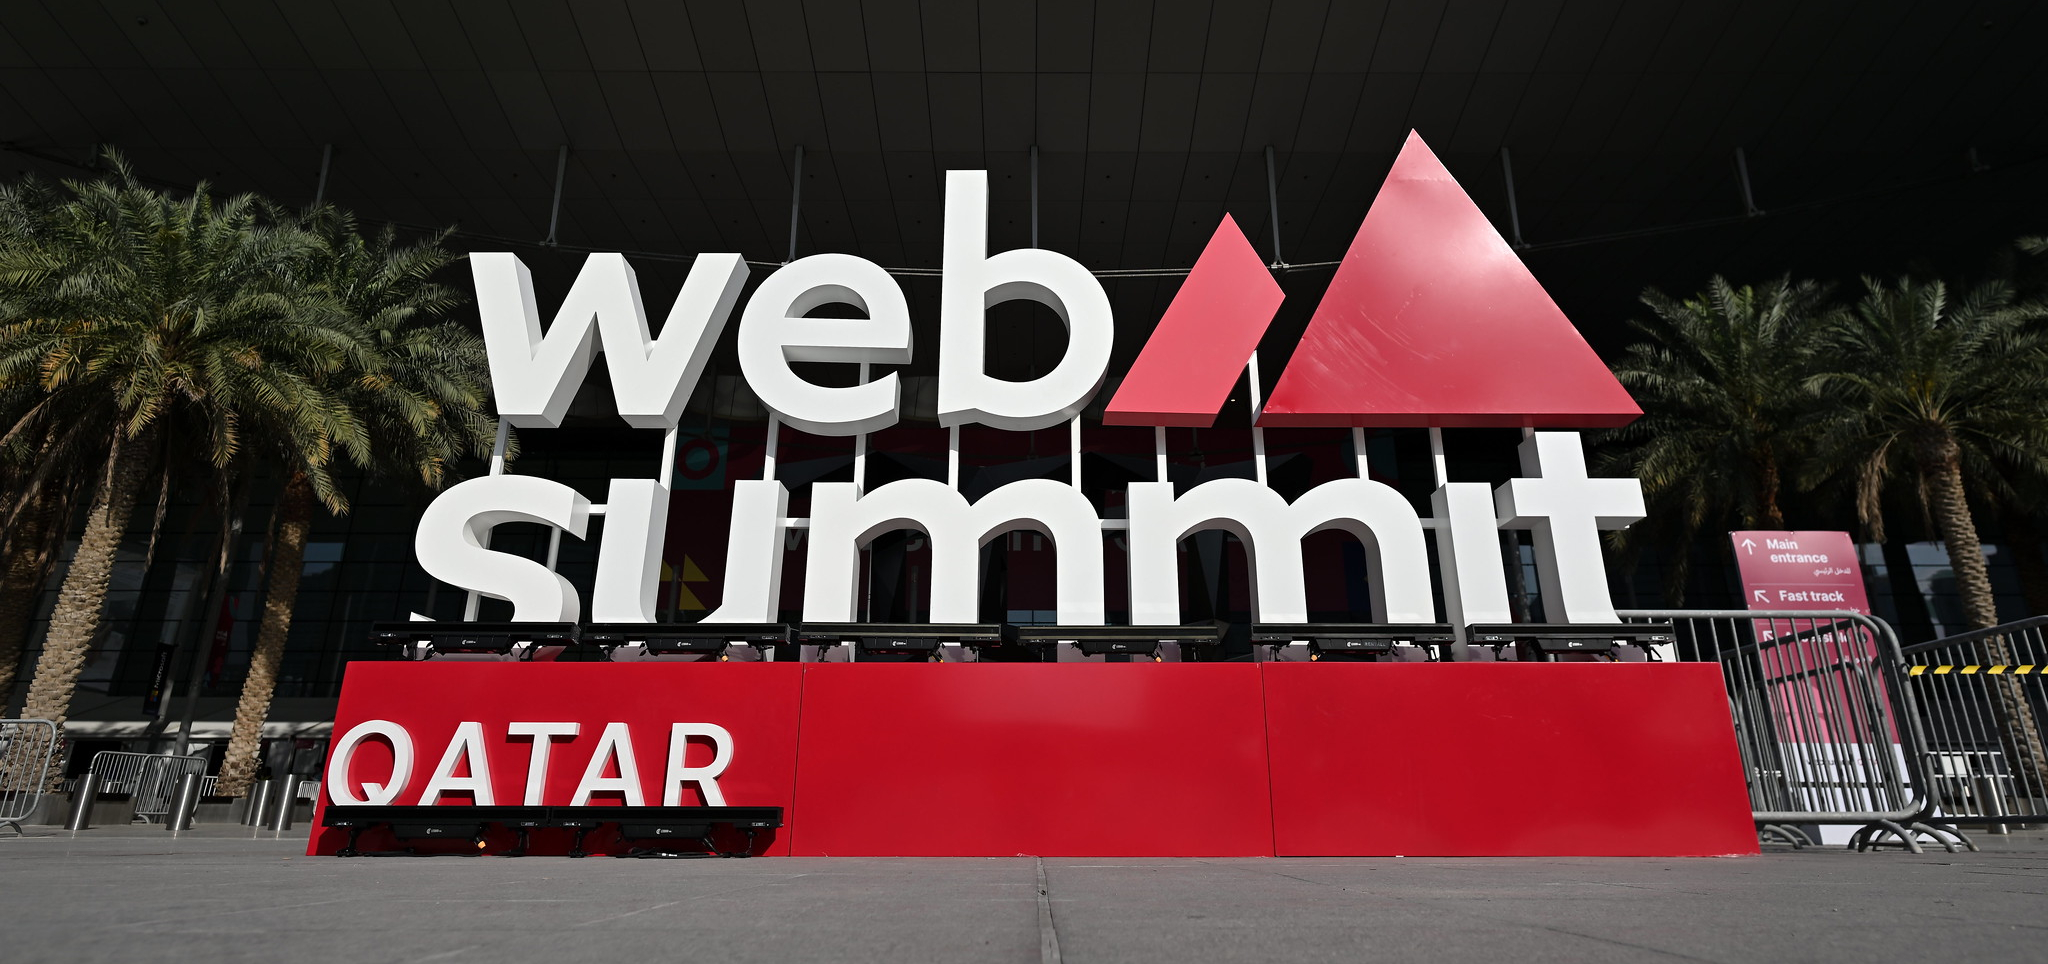 A large sign in the shape of the Web Summit Qatar logo. Behind the sign are a number of palm trees, standing in front of a modern conference centre. There are no clouds in the sky.